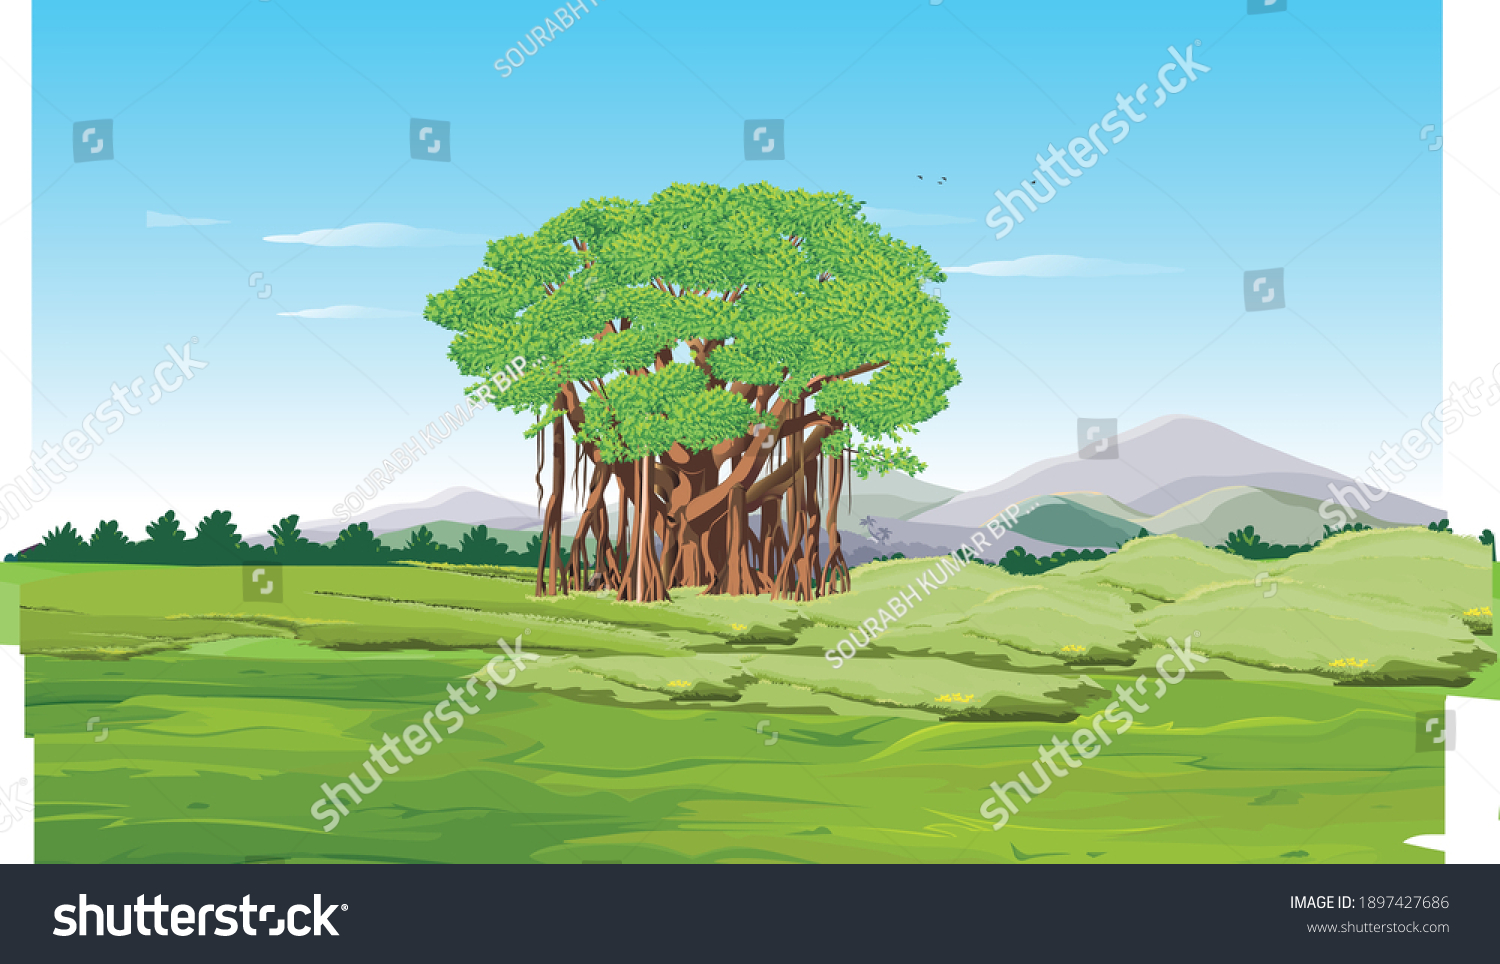 SVG of A banyan tree, also spelled 